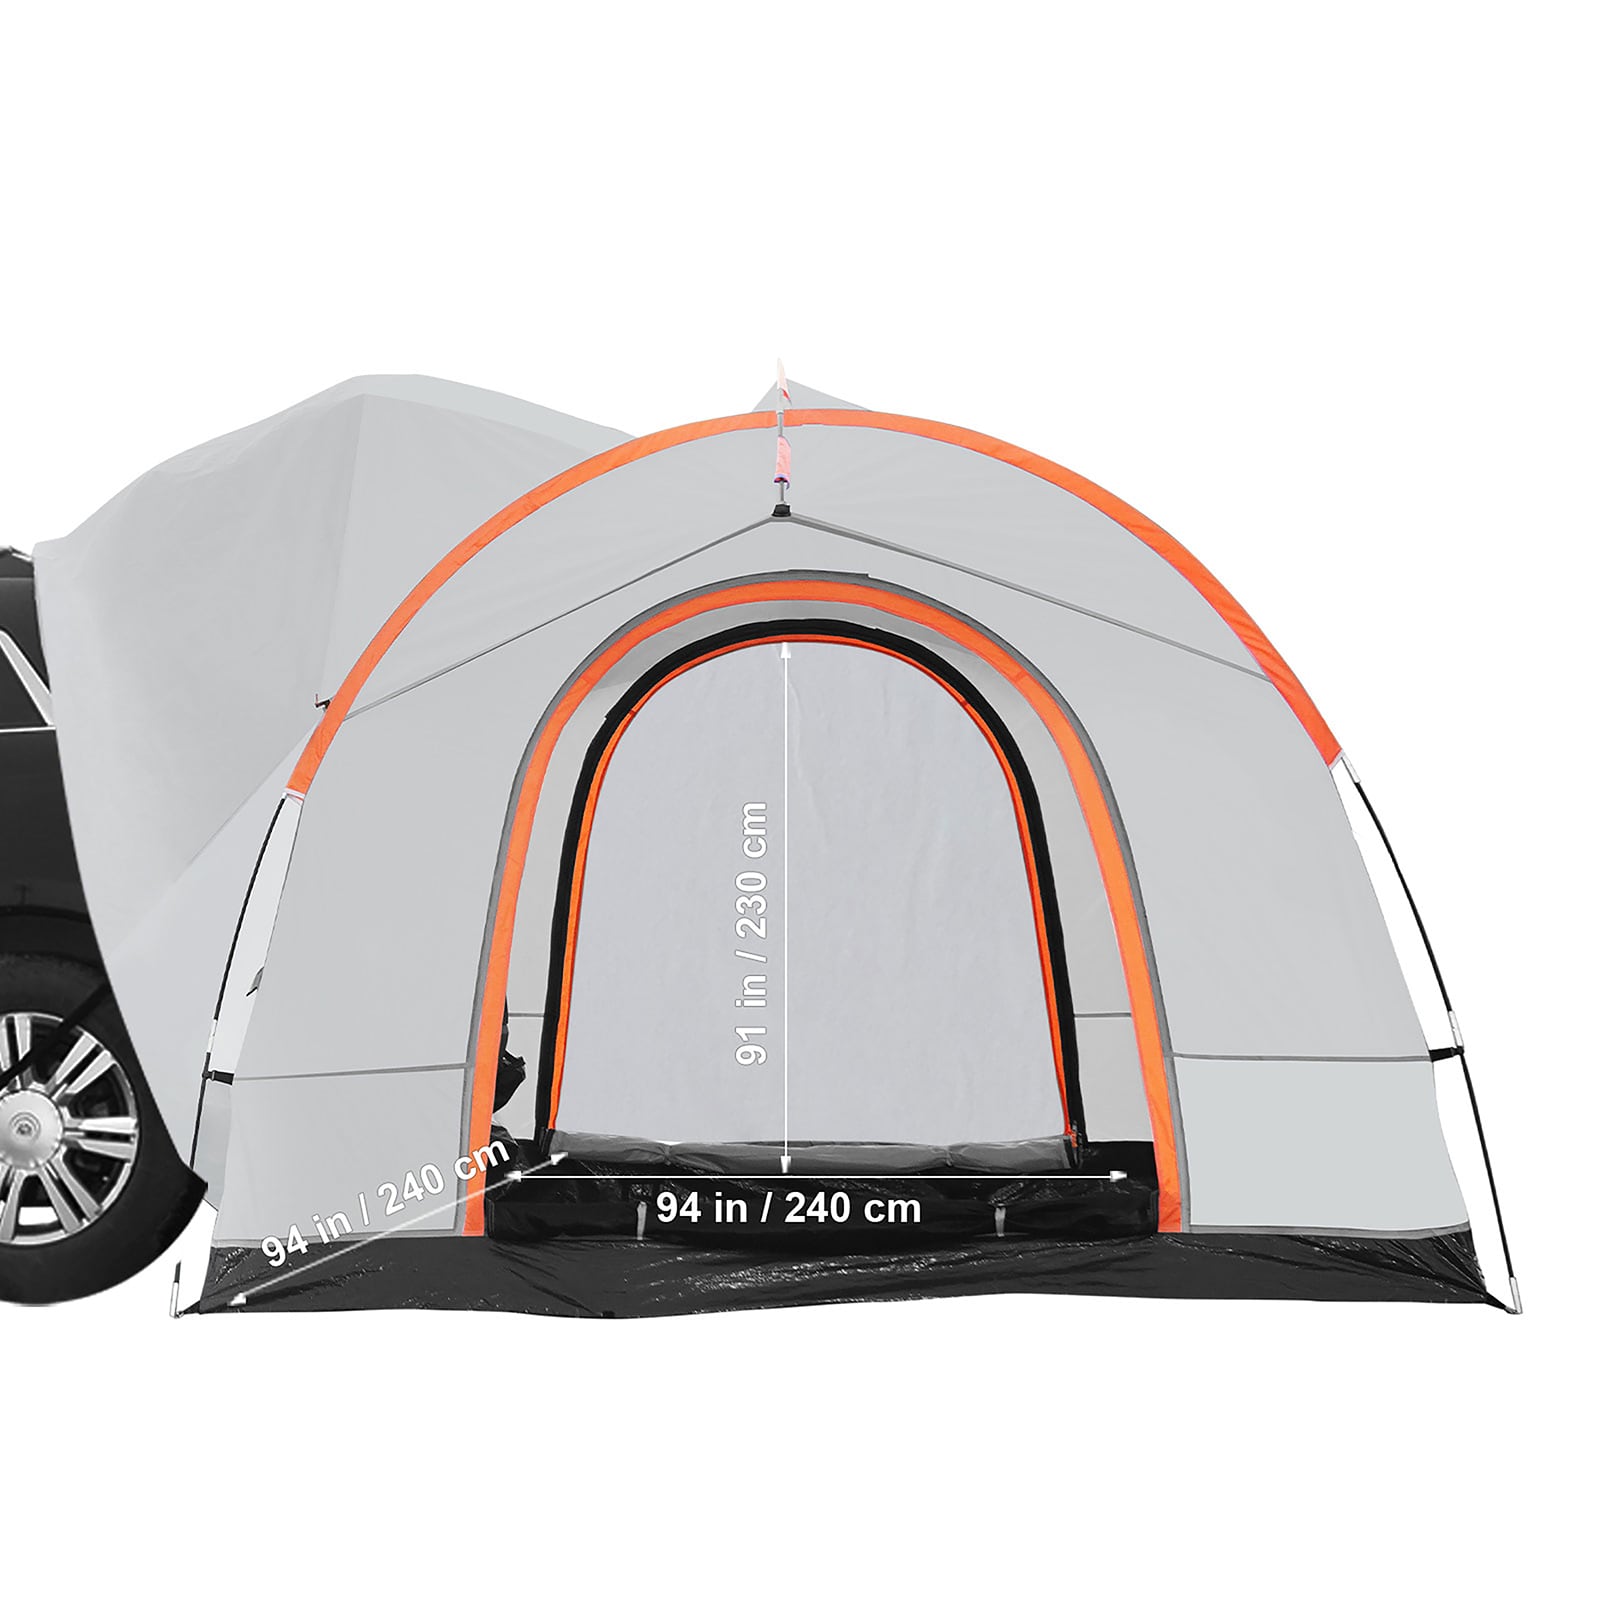 13 Top-Rated Car and SUV Tents That Will Make Camping Better